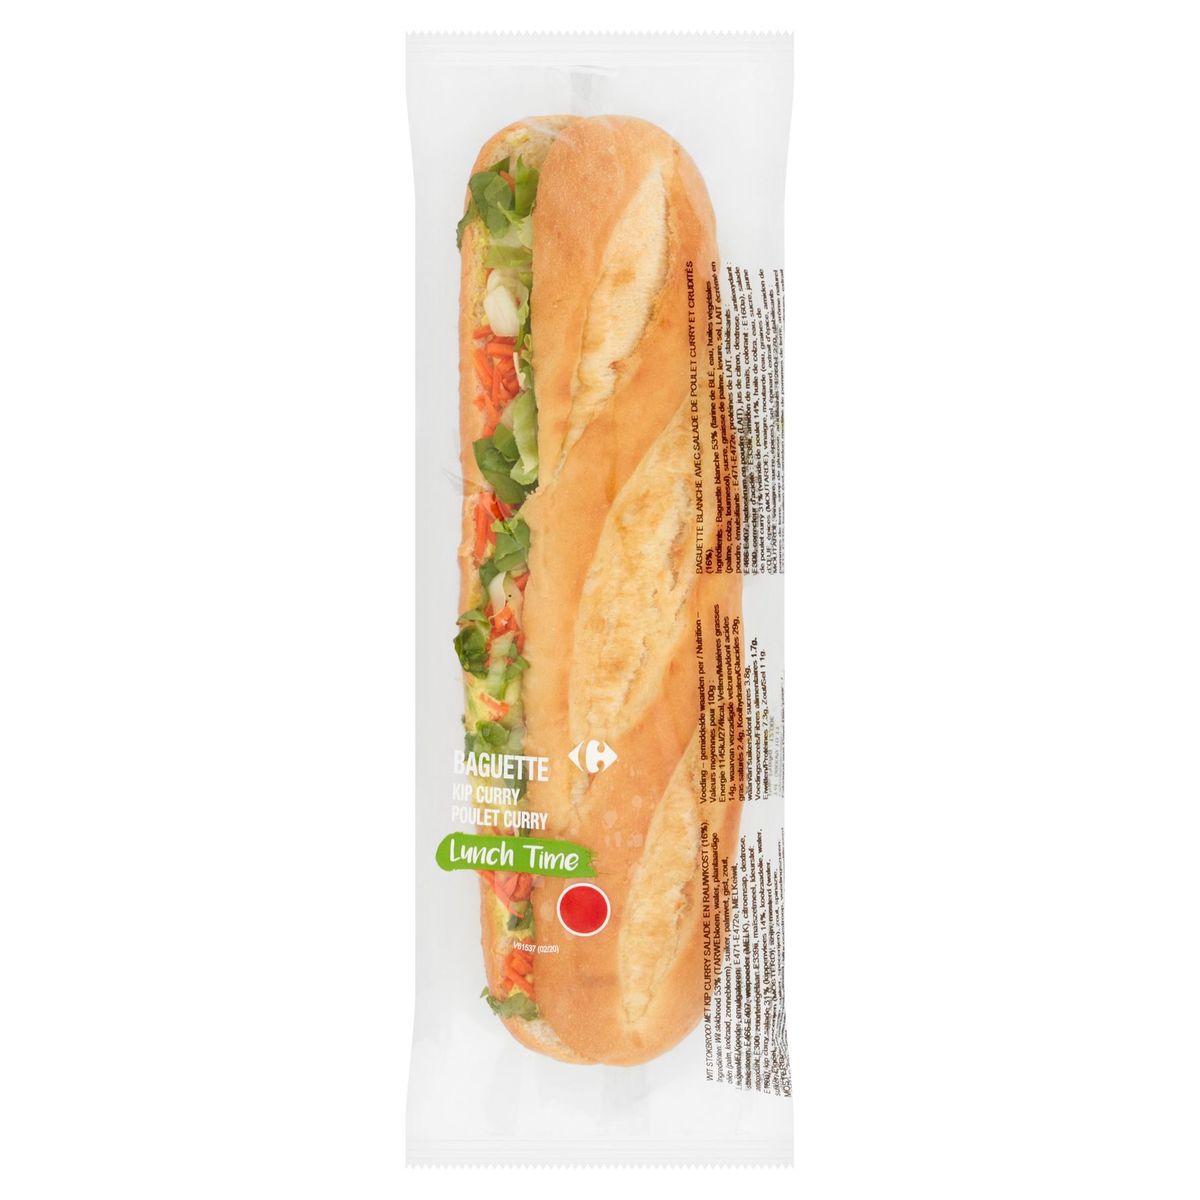 Carrefour Lunch Time Baguette Kip Curry 250 g